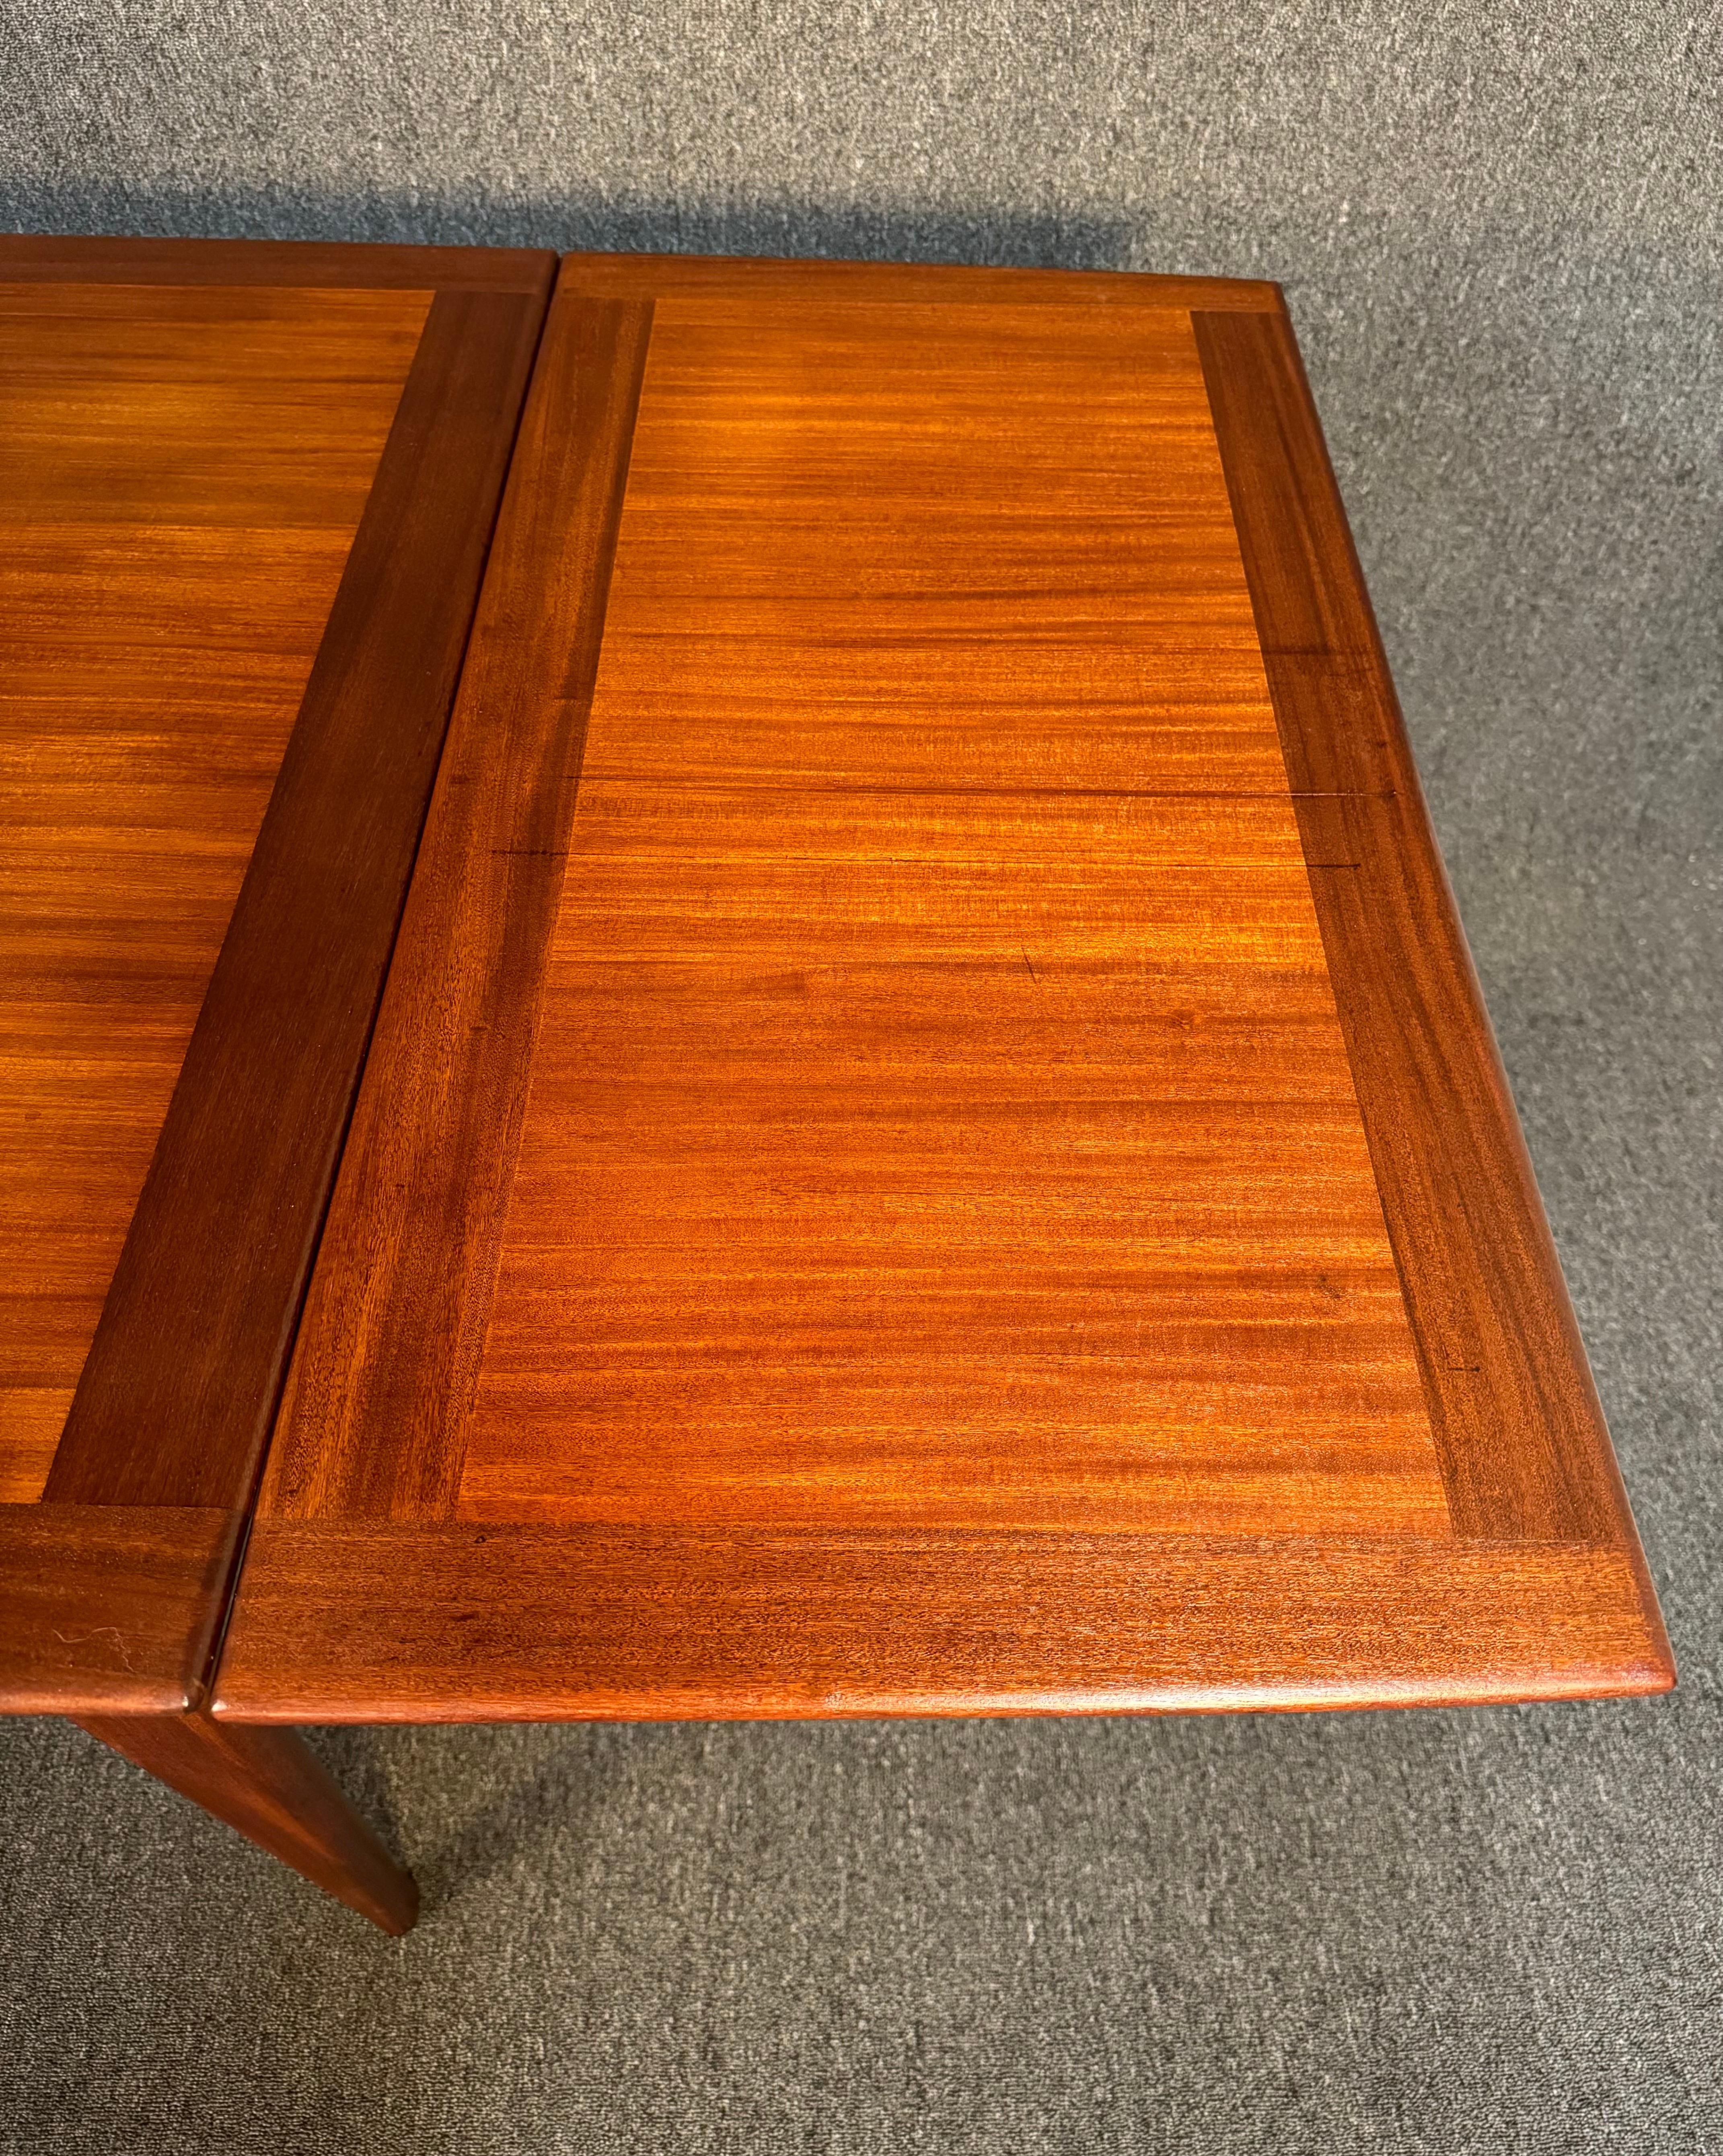 English Vintage British Mid Century Modern Afromasia Teak Dining Table by A. Younger Ltd For Sale